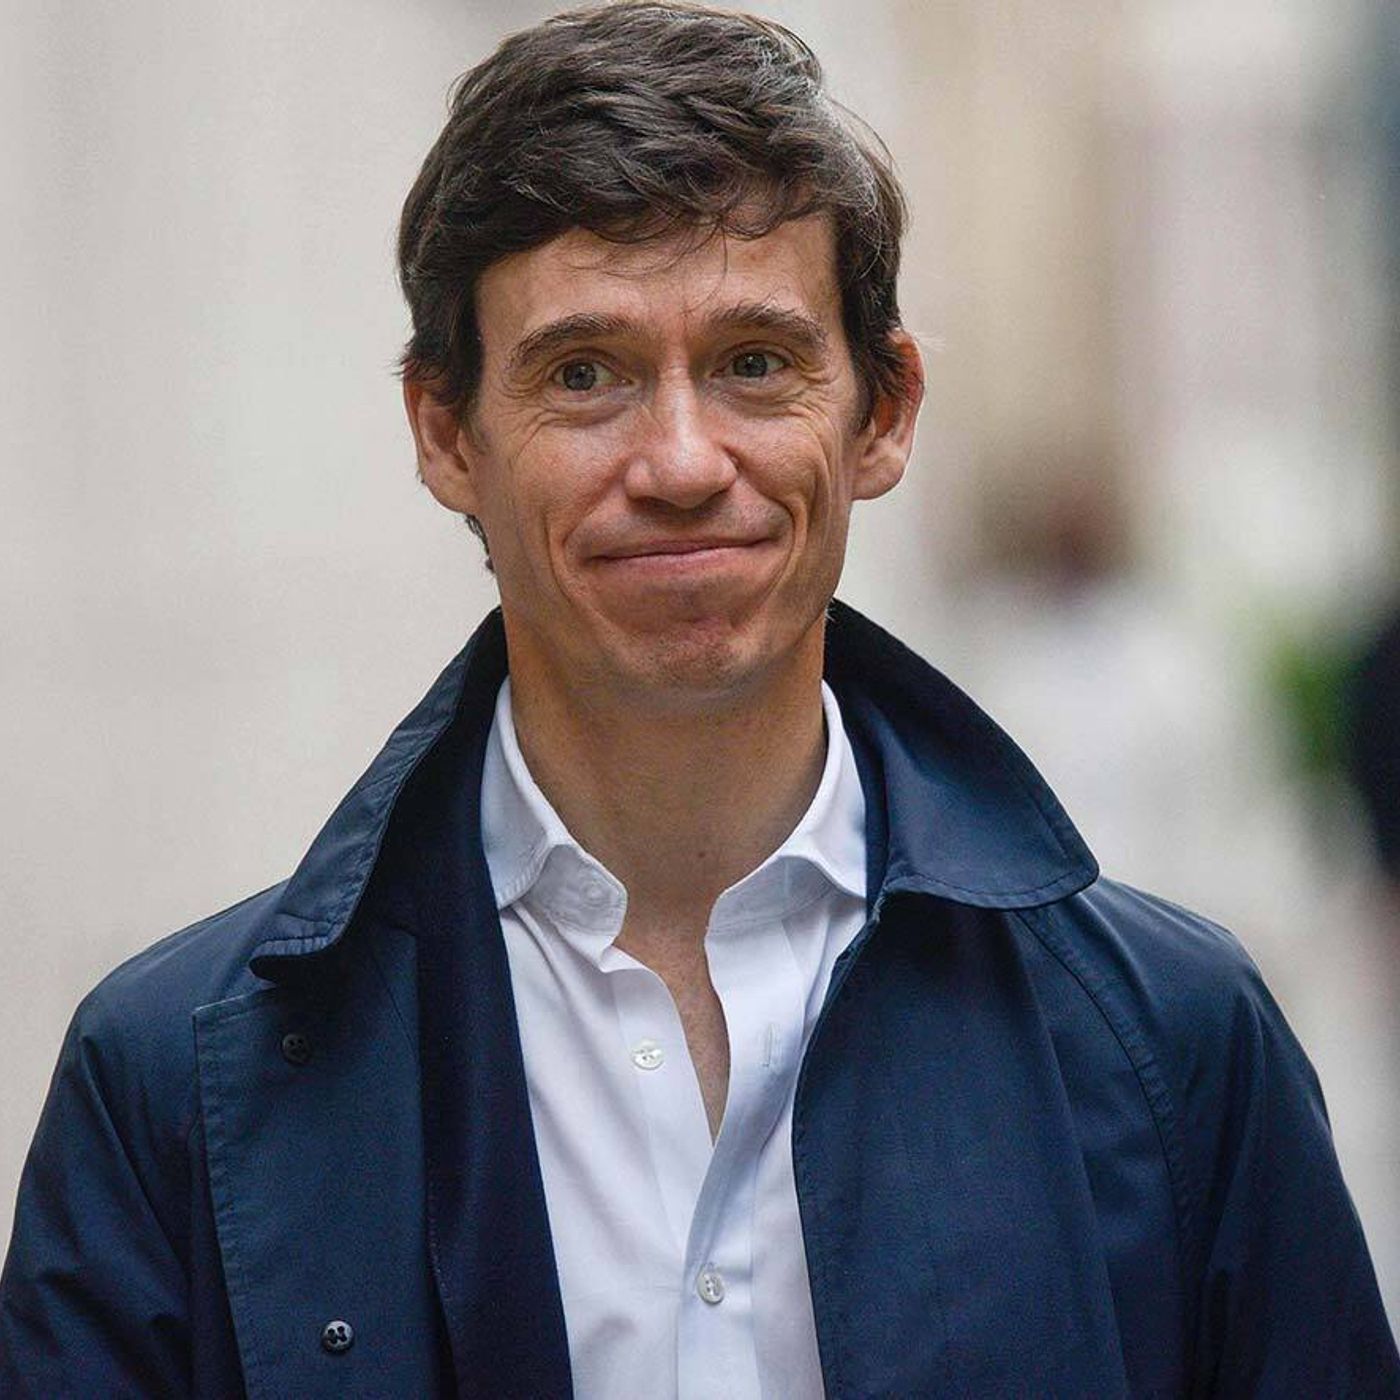 S2 Ep14: Reaction Podcast: Rory Stewart, crisis in Ukraine and Tim Marshall